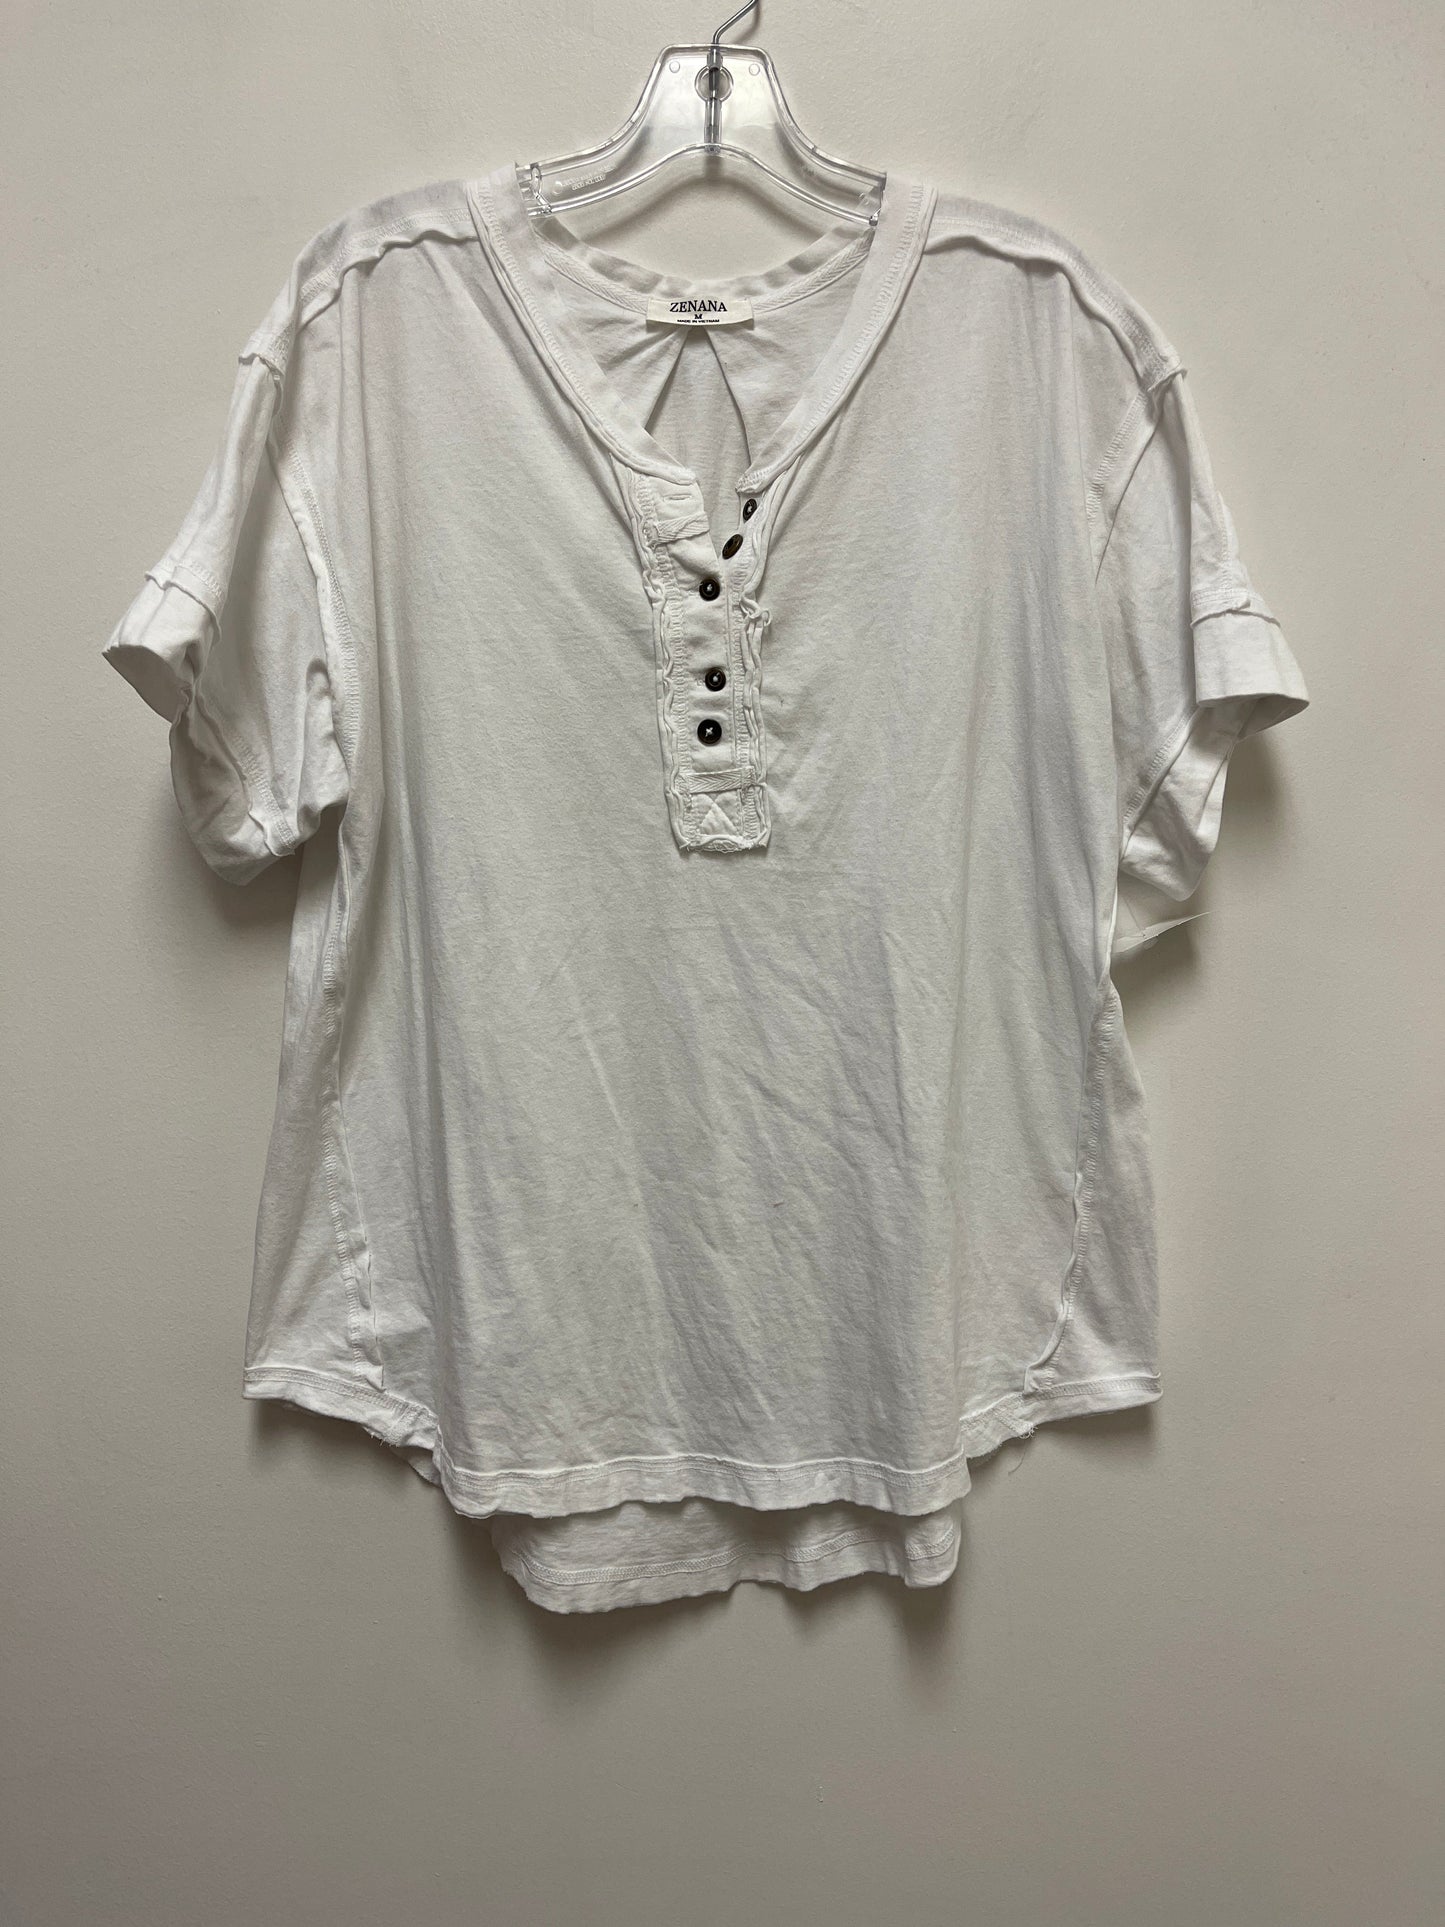 White Top Short Sleeve Zenana Outfitters, Size M